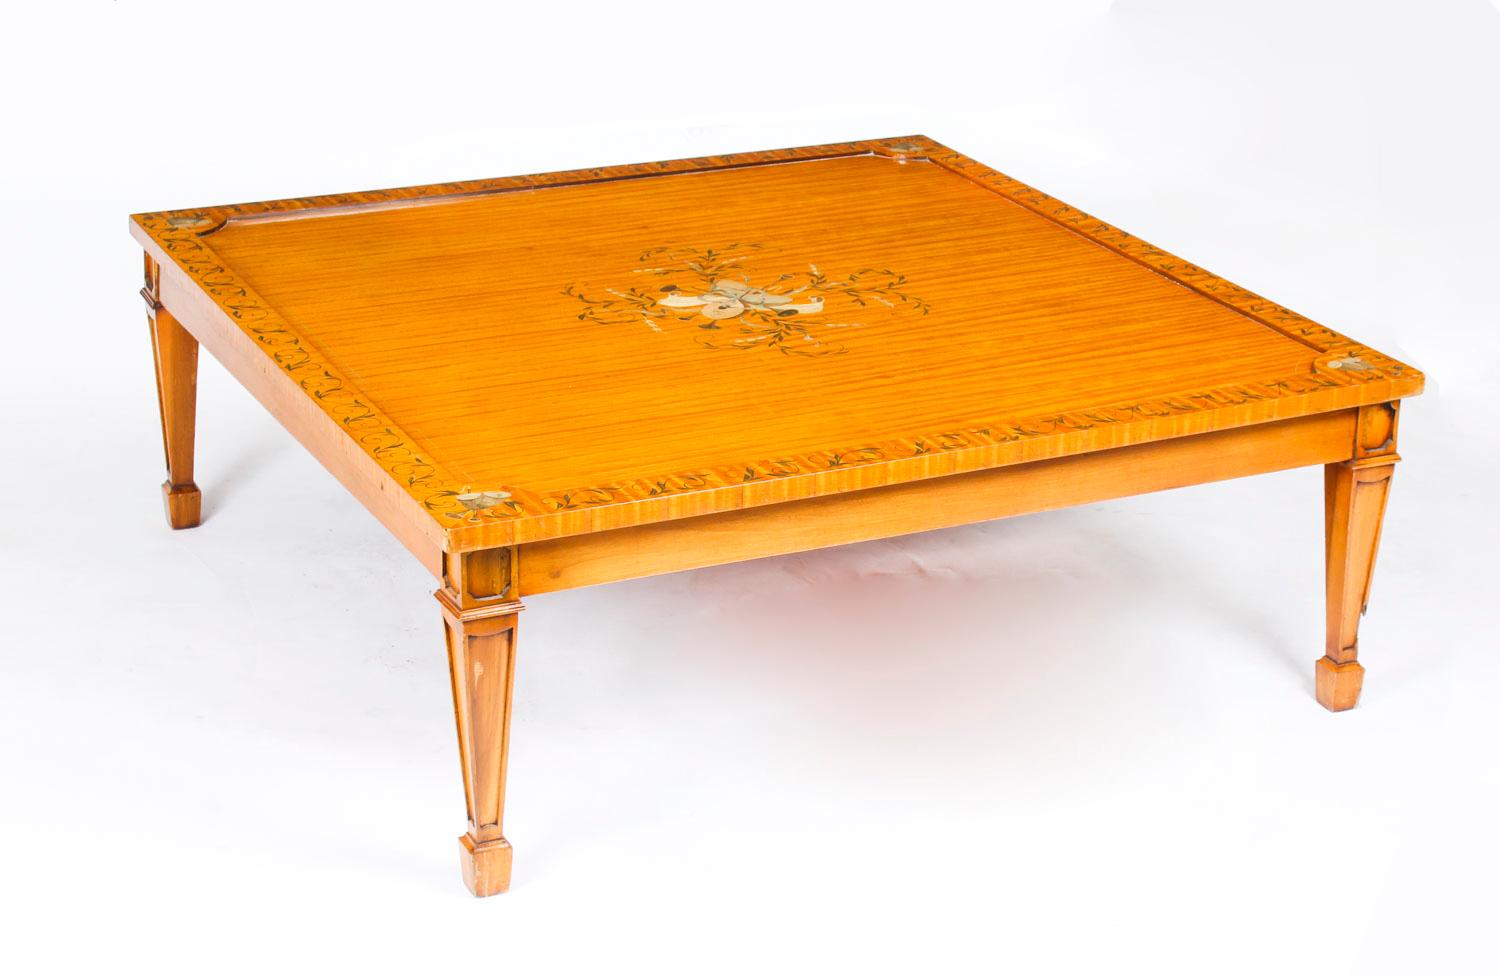 Vintage Sheraton Revival Painted Satinwood Coffee Table, 20th Century For Sale 6